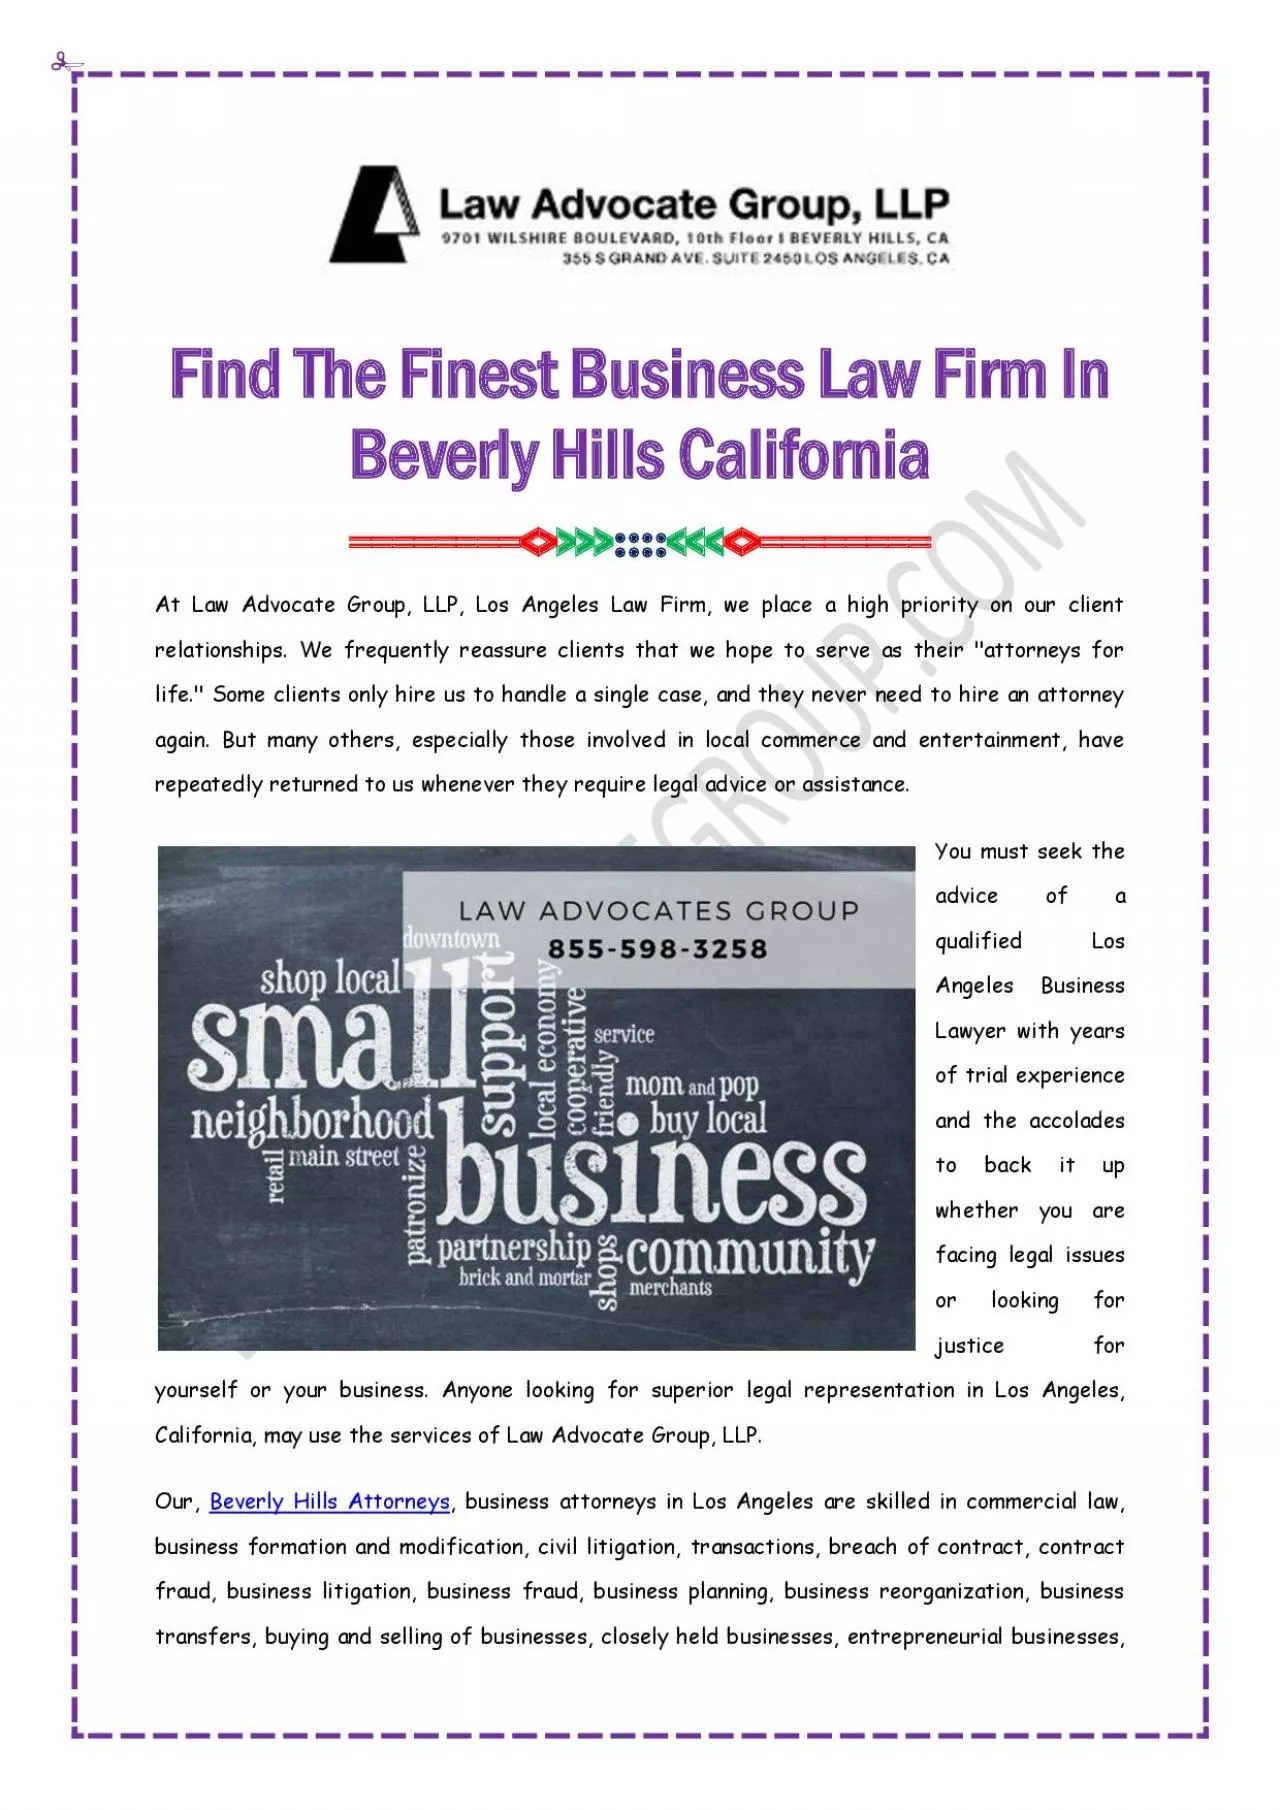 Business Law Firm In Beverly Hills California